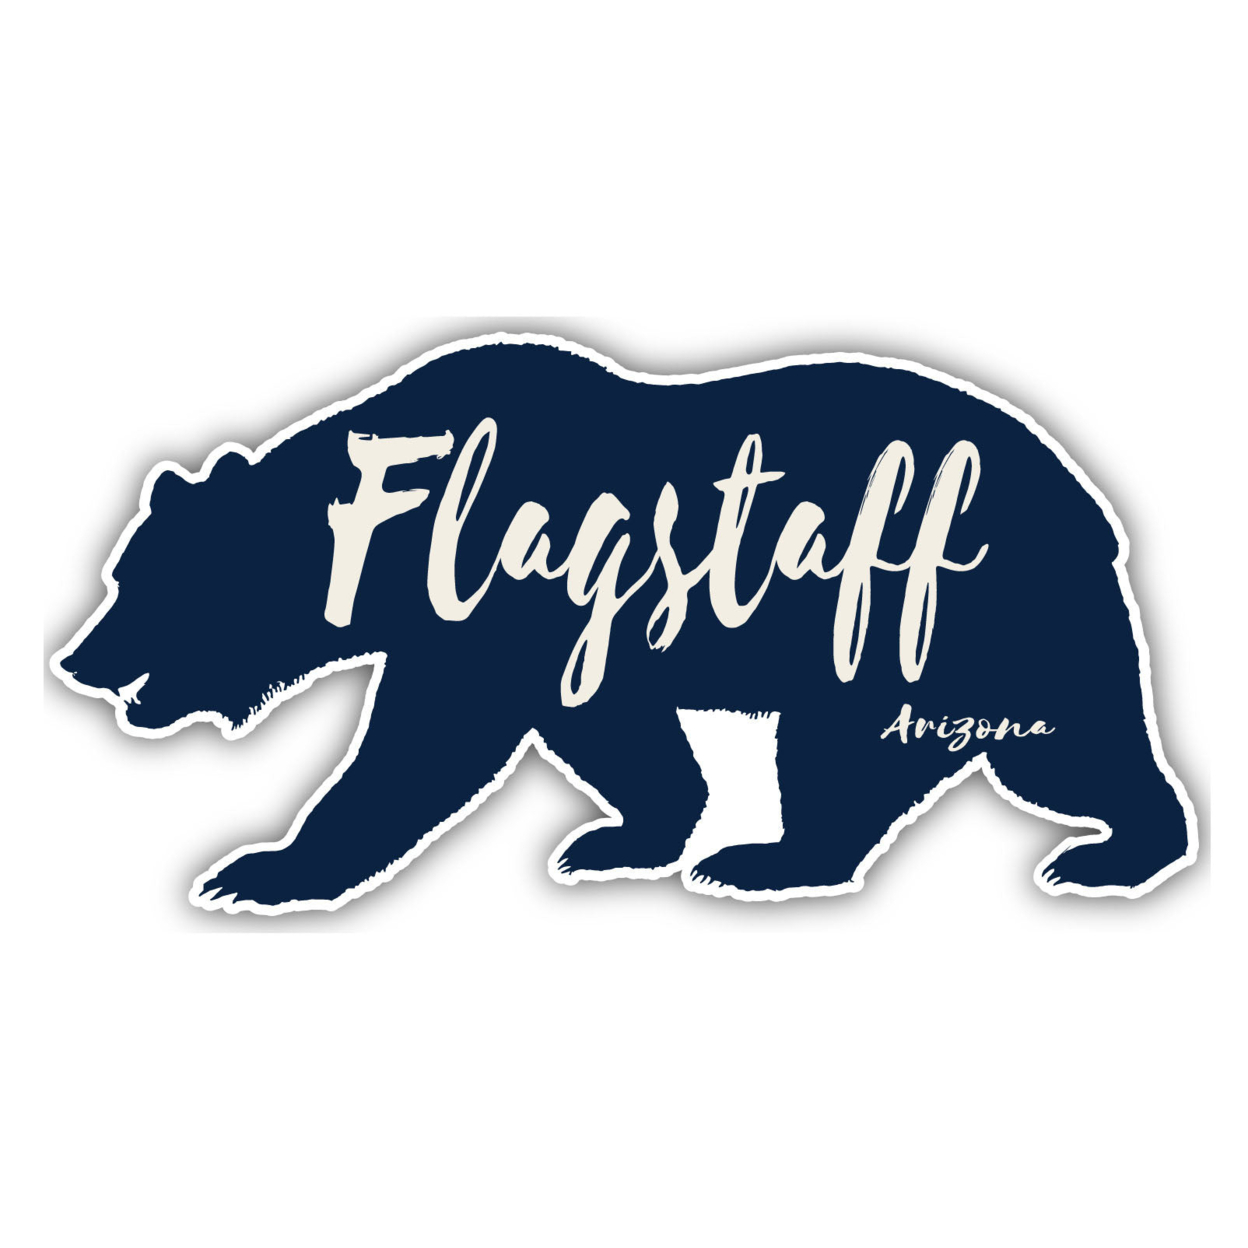 Flagstaff Arizona Souvenir Decorative Stickers (Choose Theme And Size) - 4-Pack, 2-Inch, Camp Life